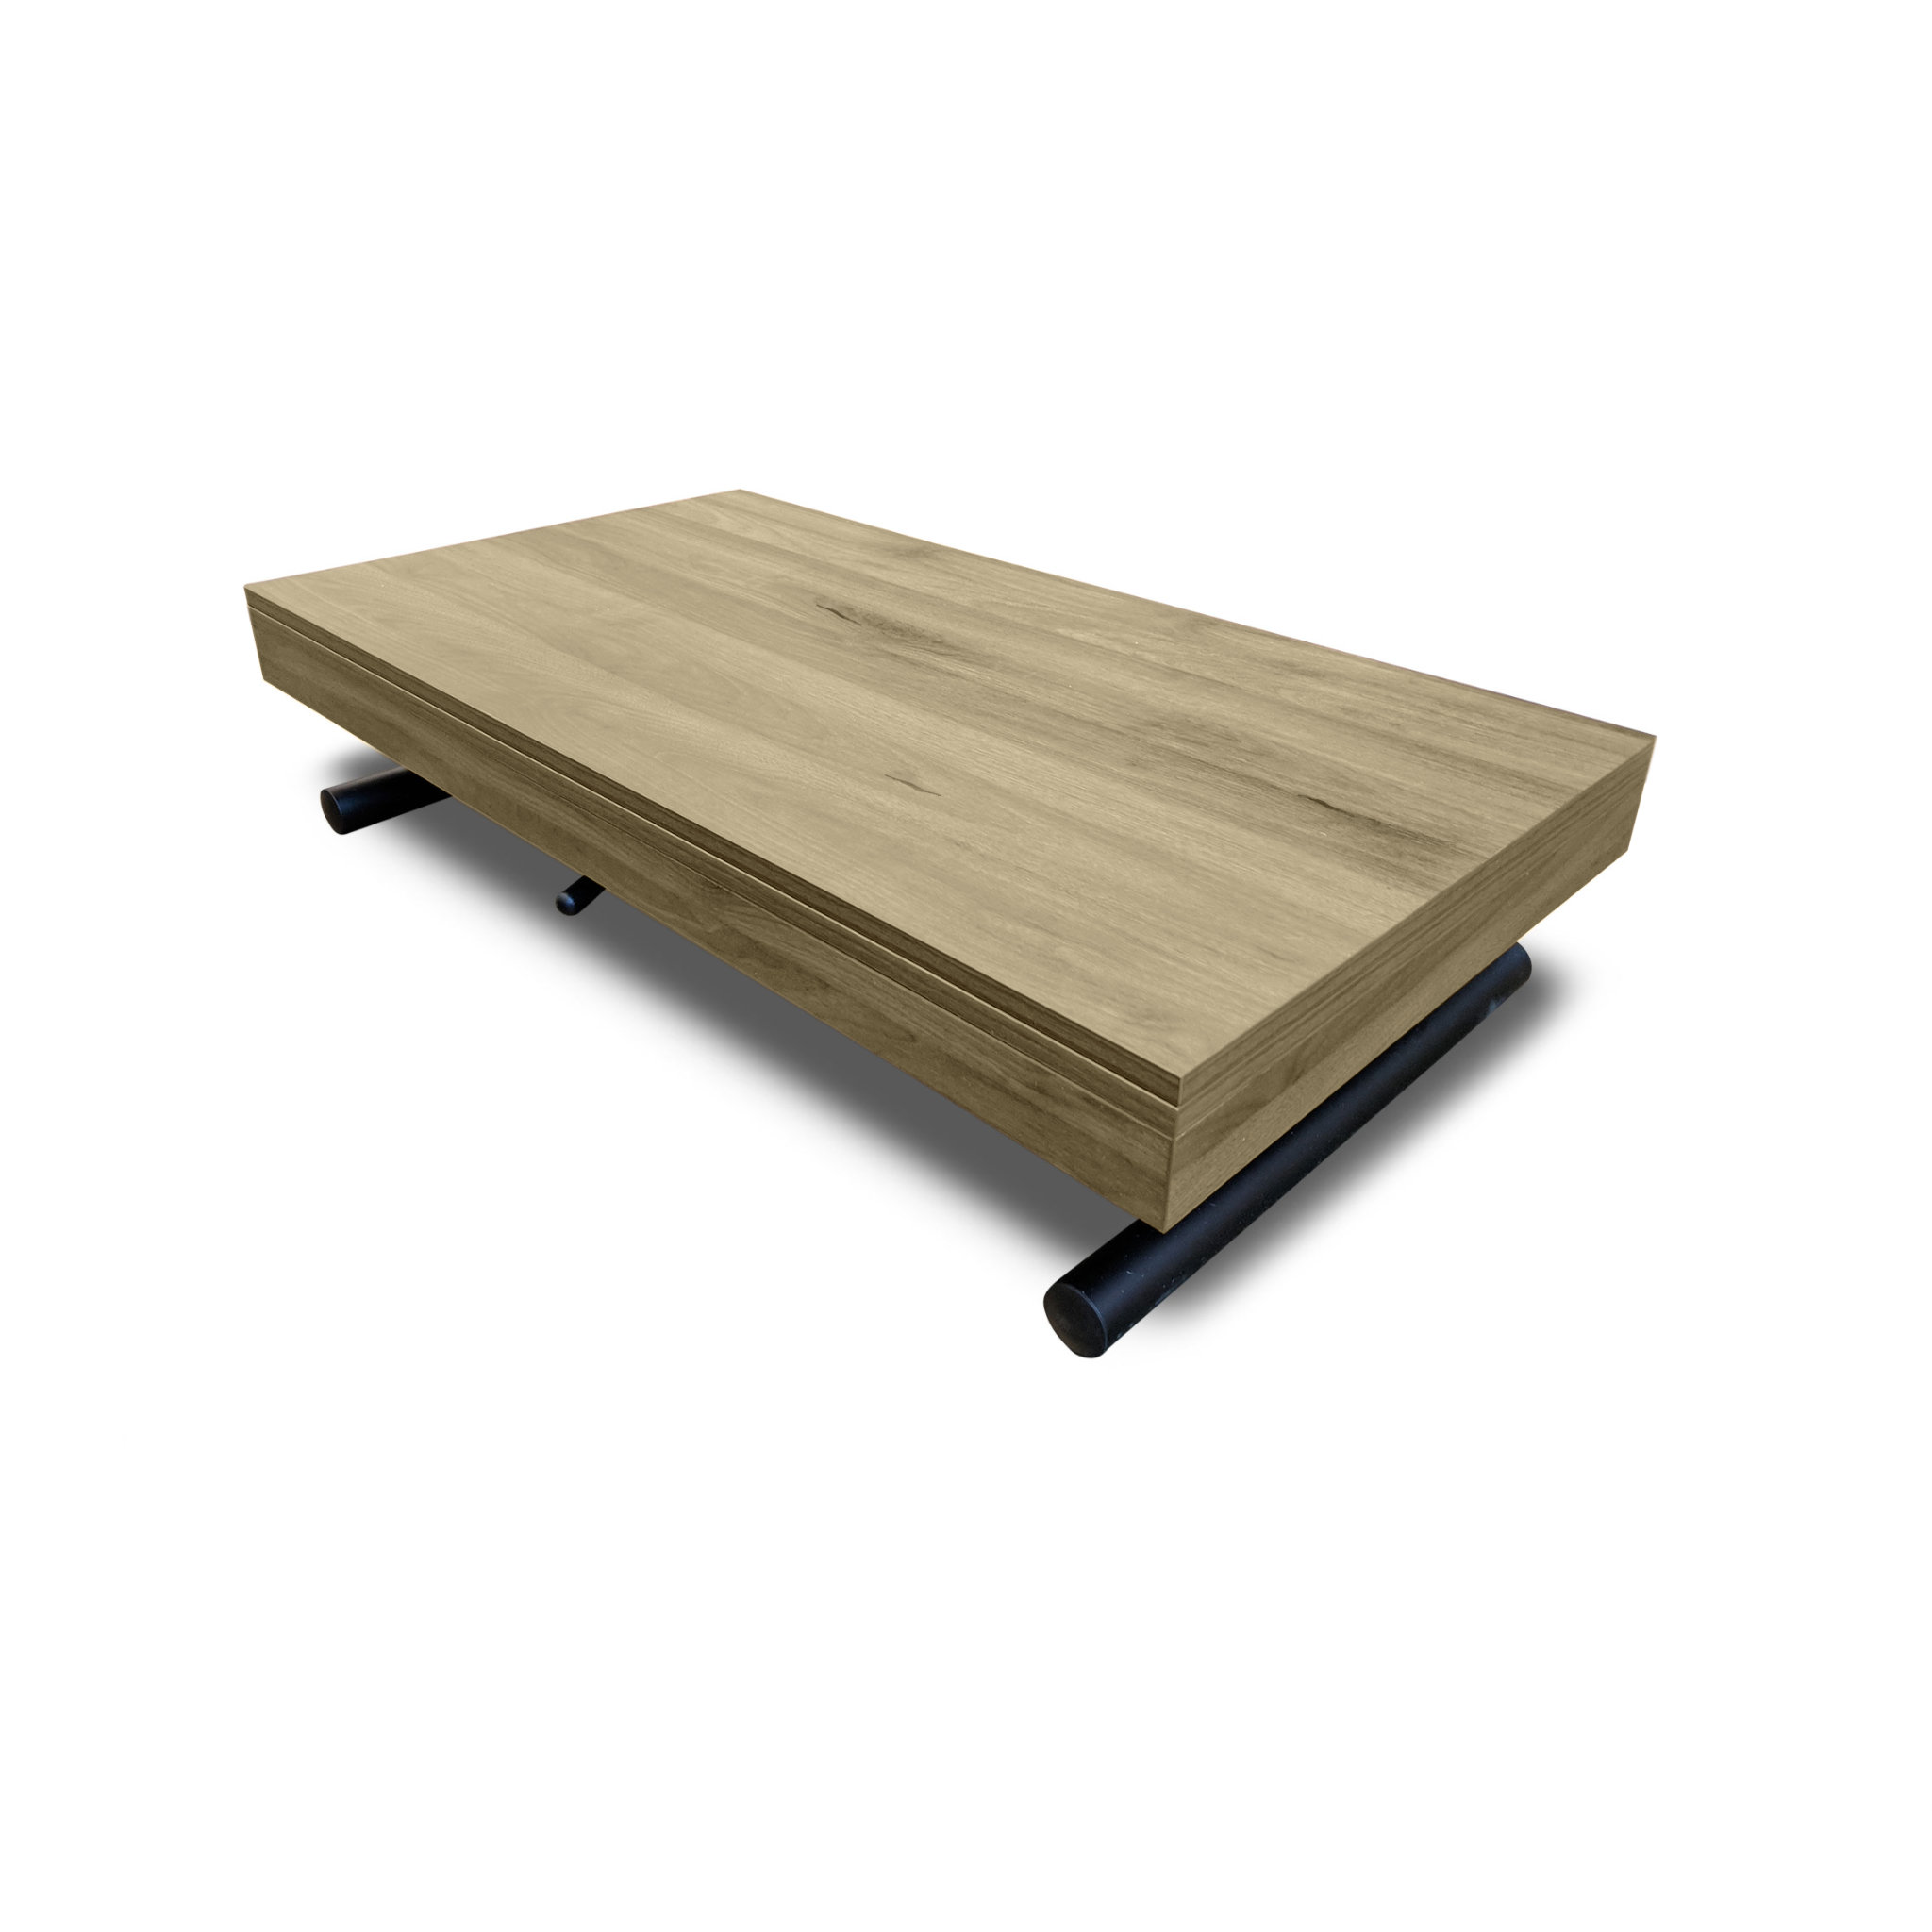 Alzare Square Transforming Coffee Table Expand Furniture Folding Tables Smarter Wall Beds Space Savers